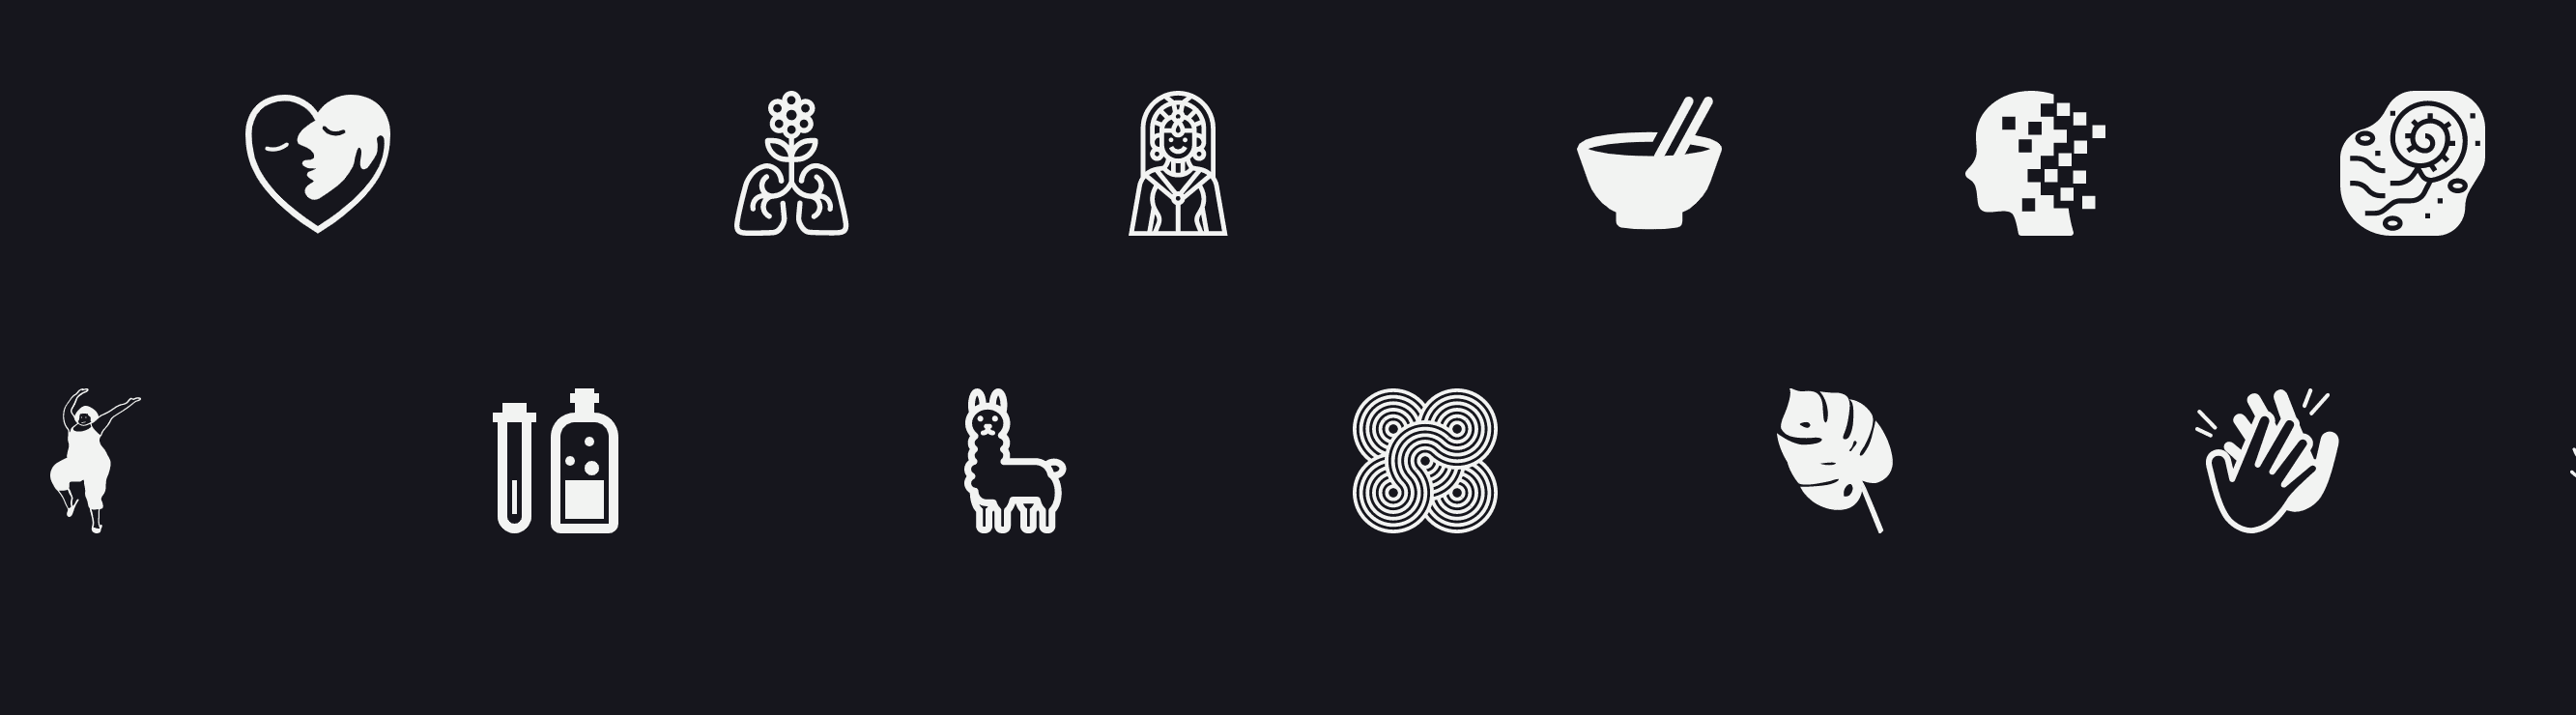 the noun project free icons